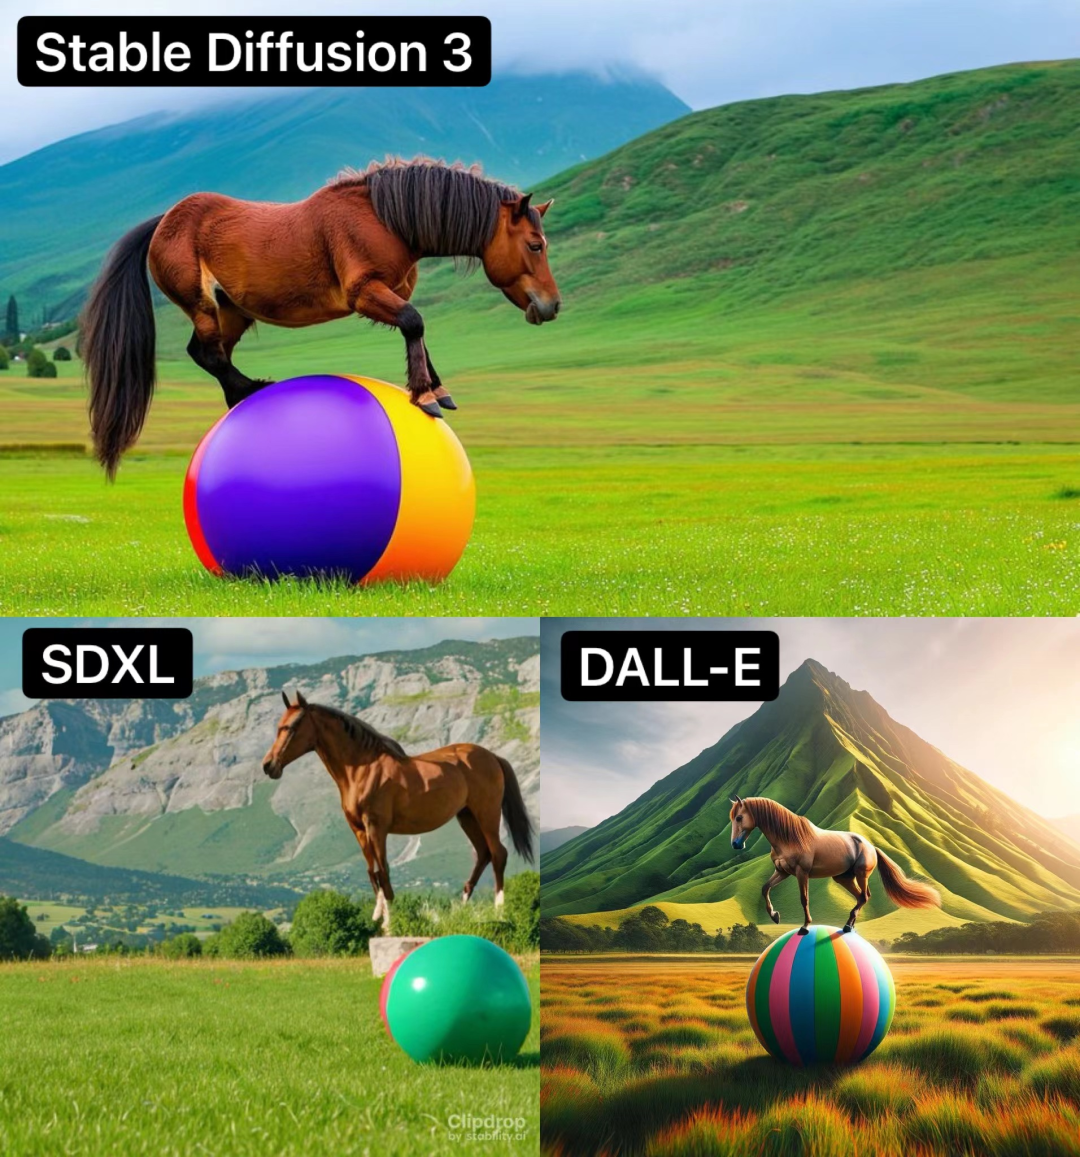 Improvements of Stable Diffusion 3